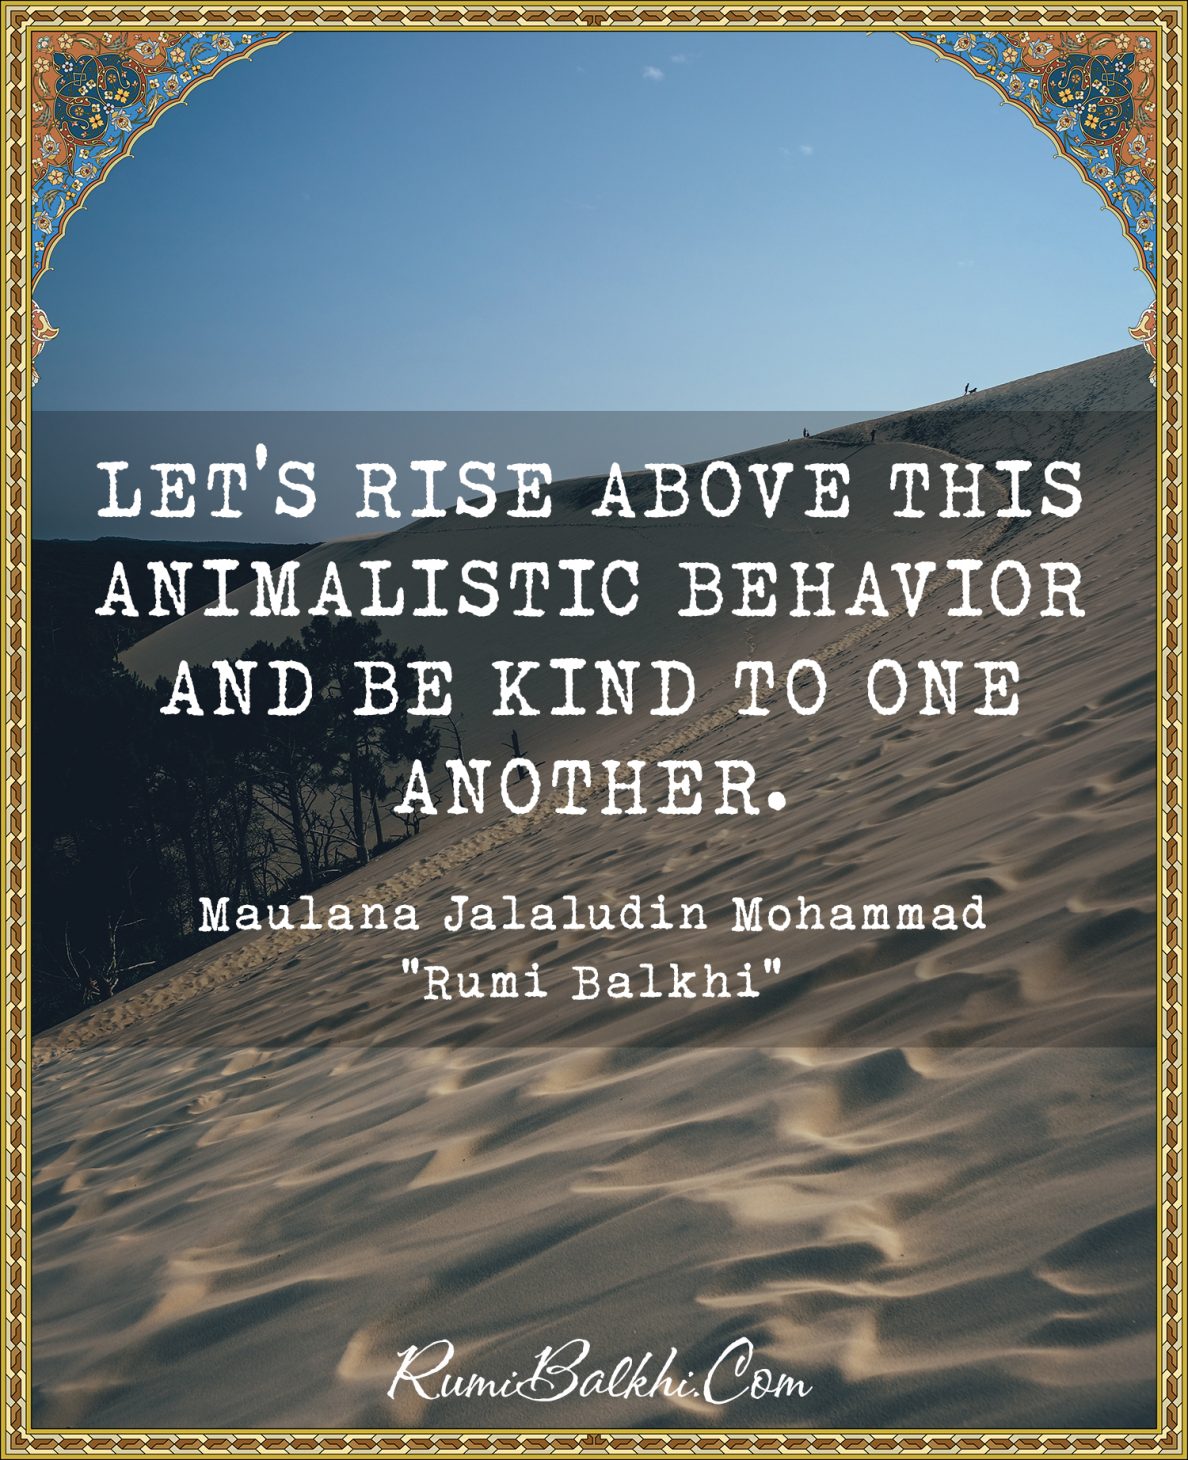 Let’s rise above this animalistic behavior and be kind to one another